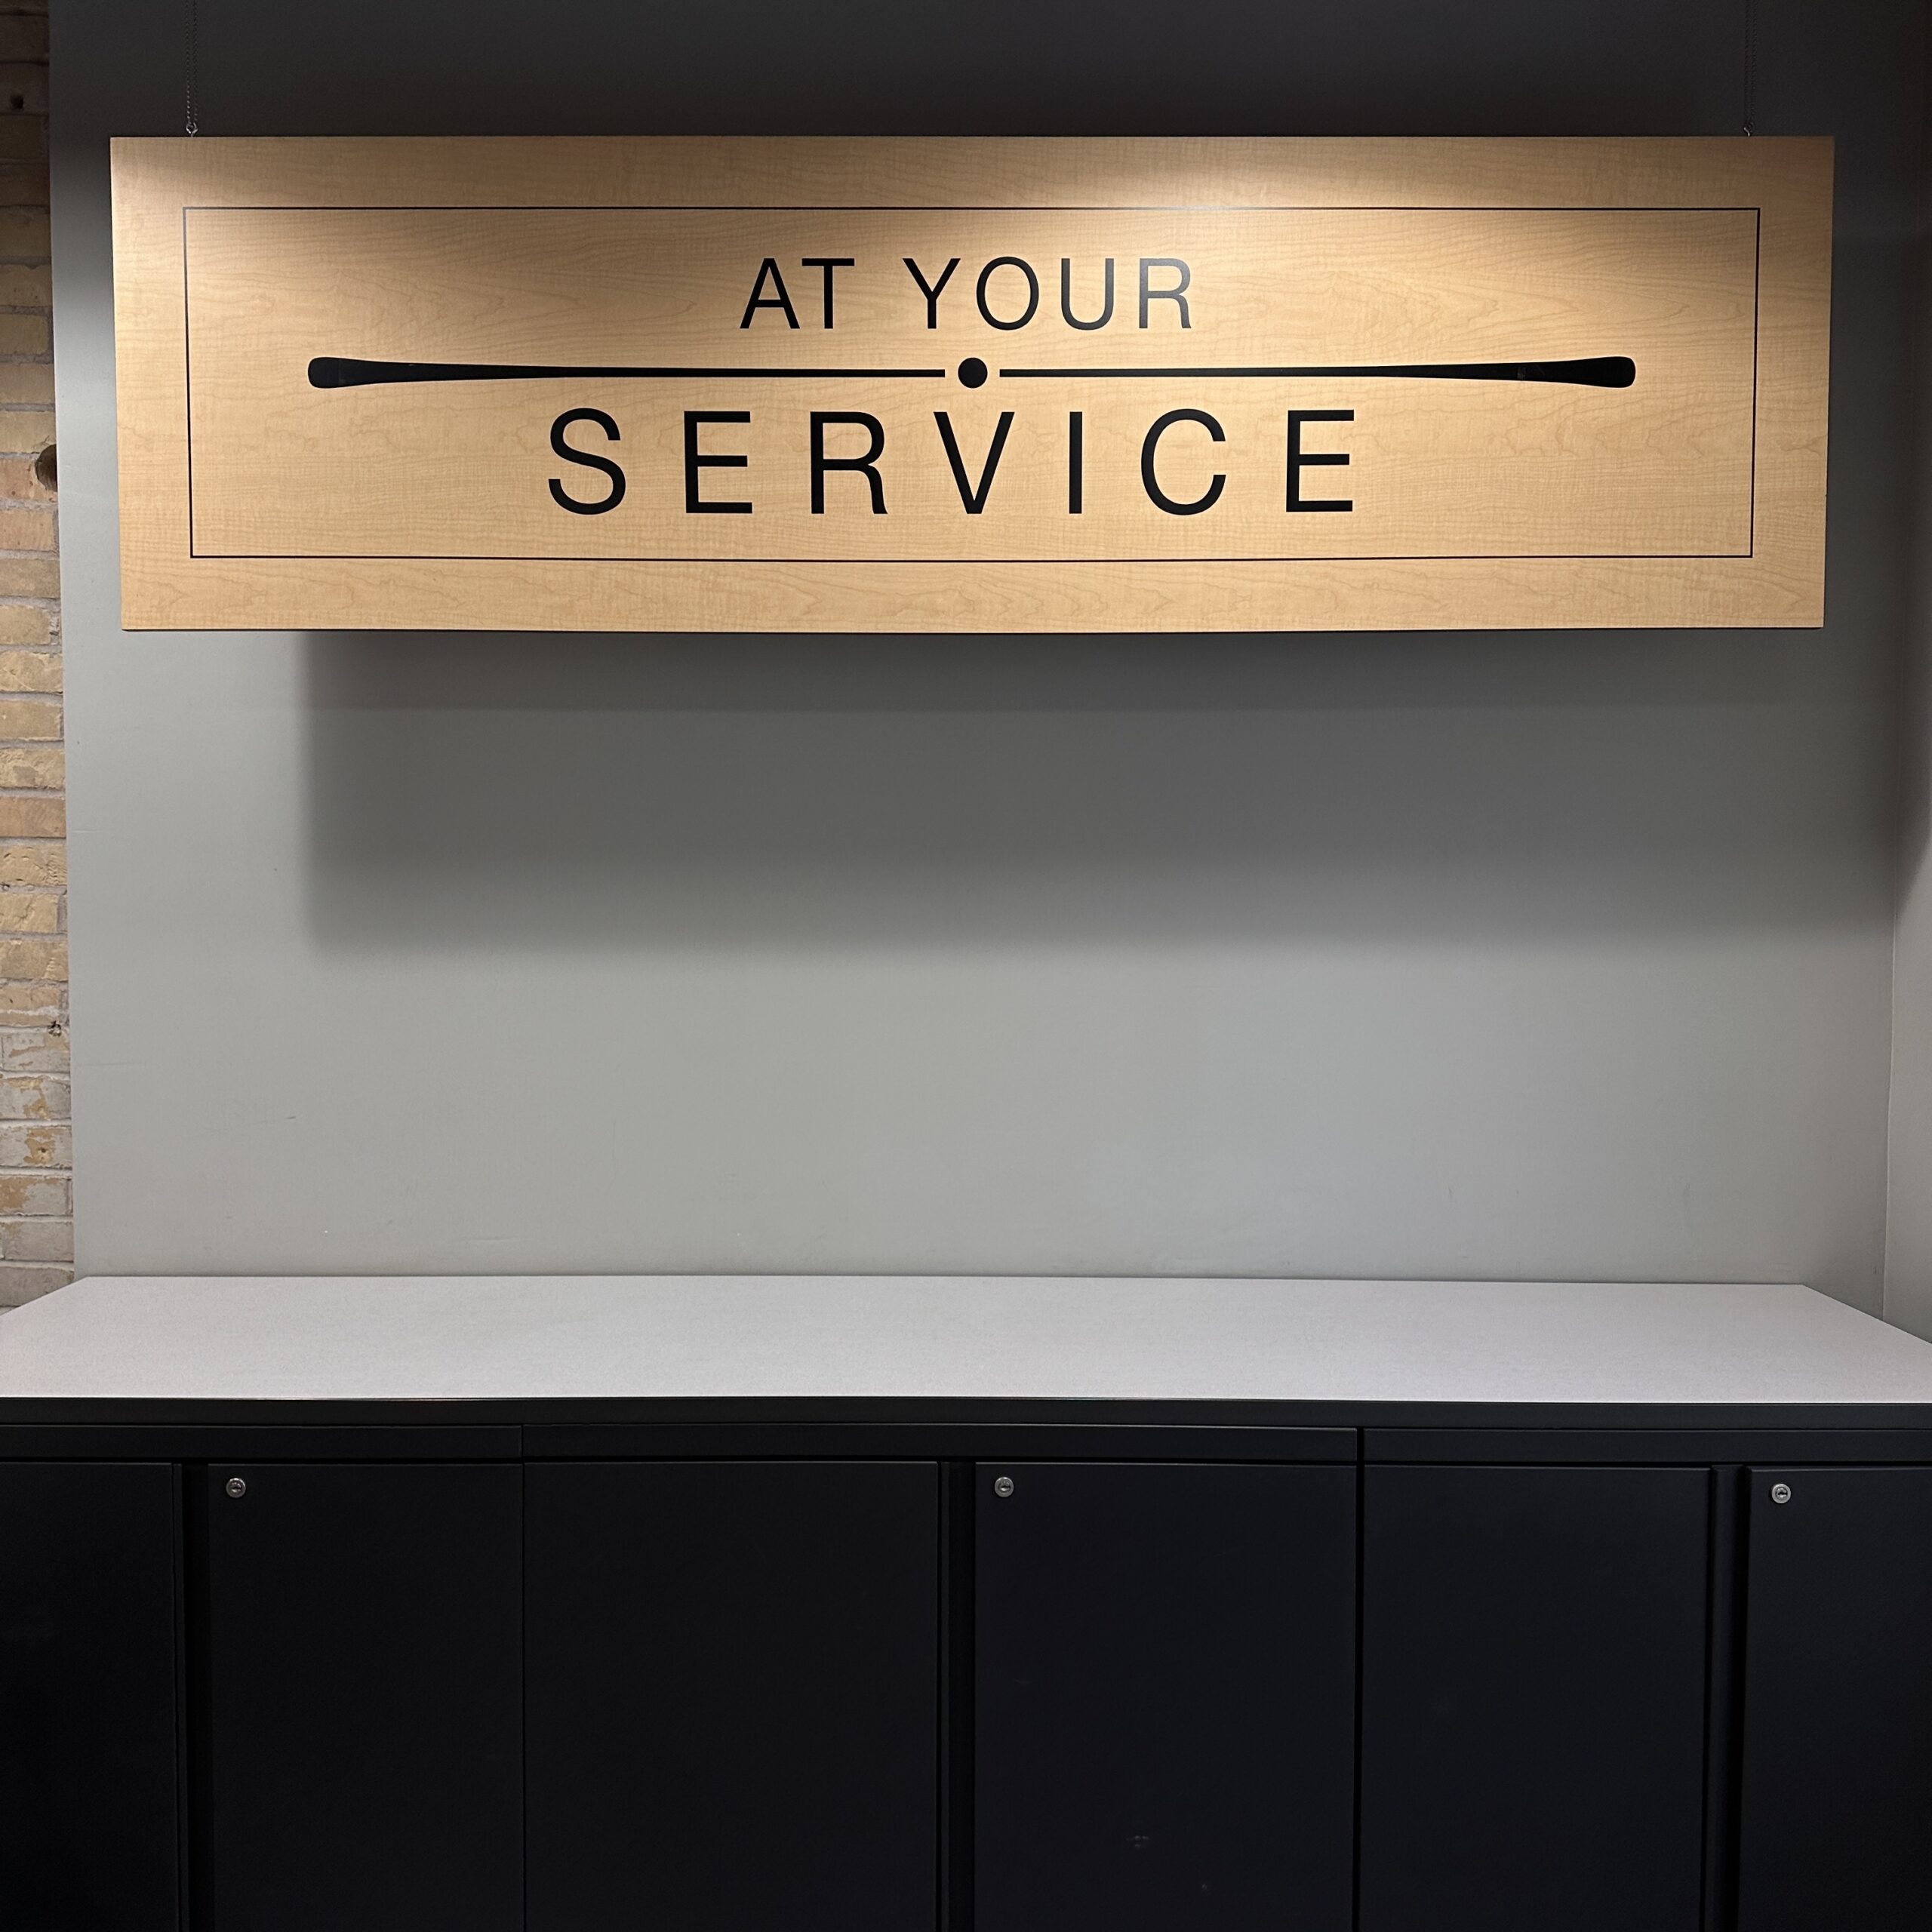 sign that says "at your service"